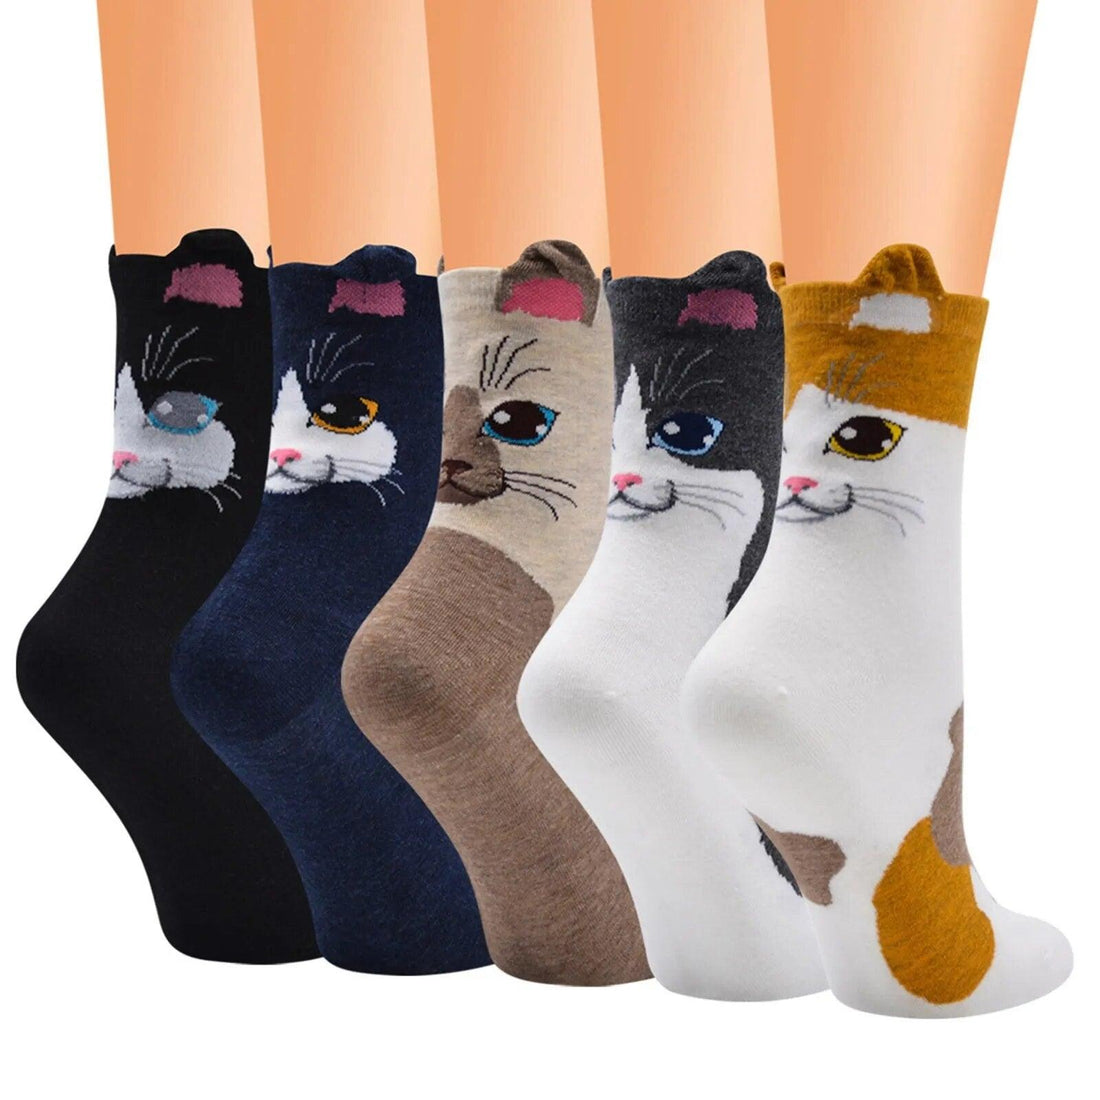 Cute Cartoon Cat Socks, 14 Designs - Just Cats - Gifts for Cat Lovers